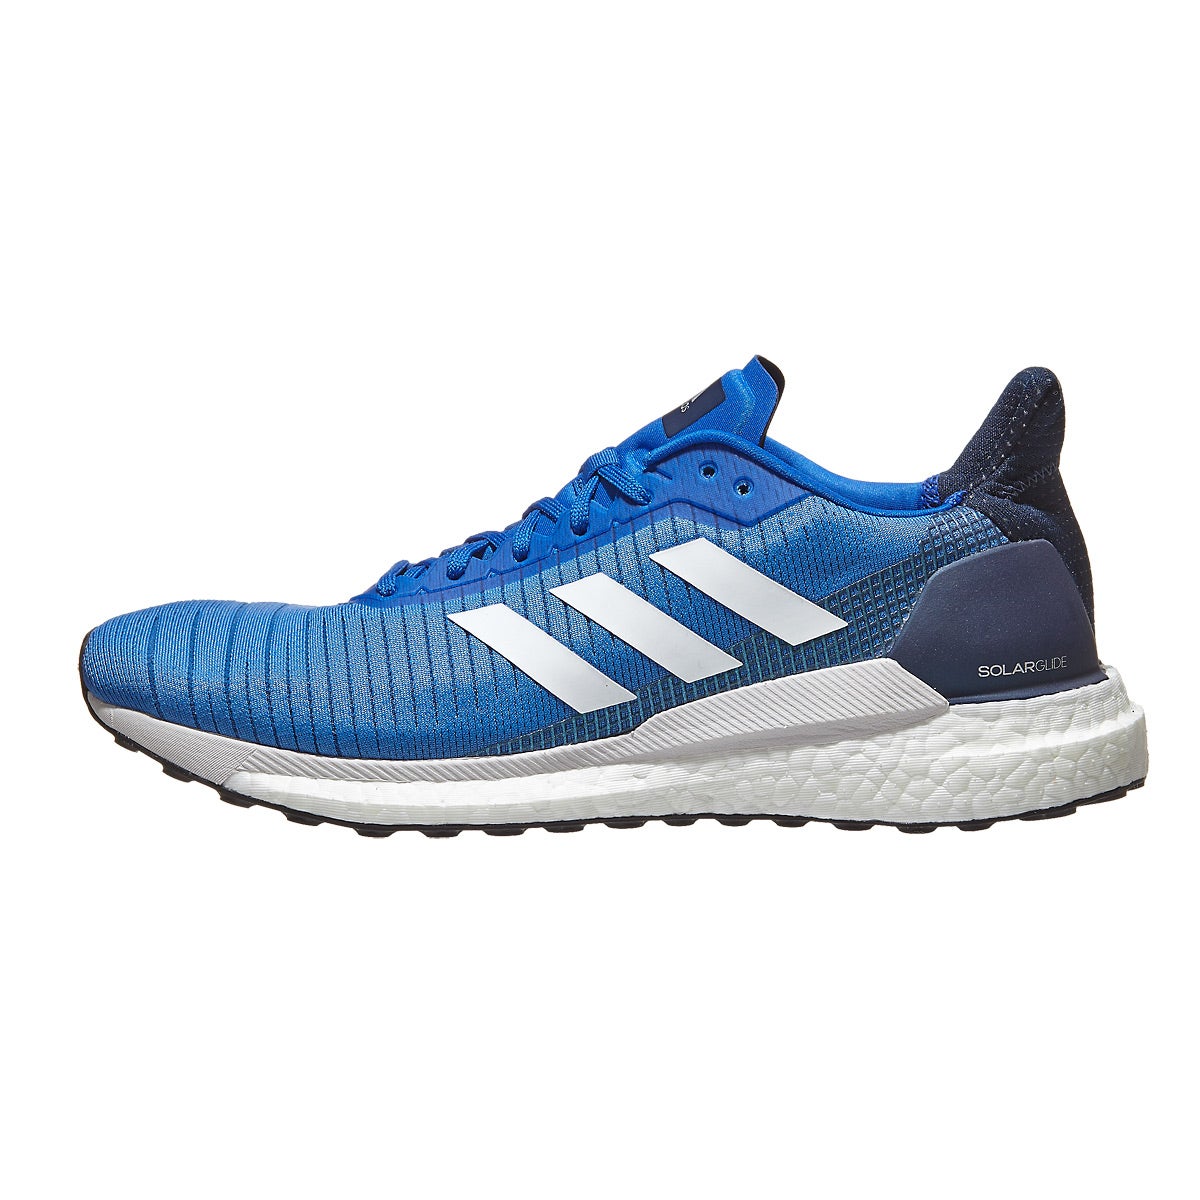 adidas Solar Glide Men's Shoes Blue/White/Navy 360° View | Running ...